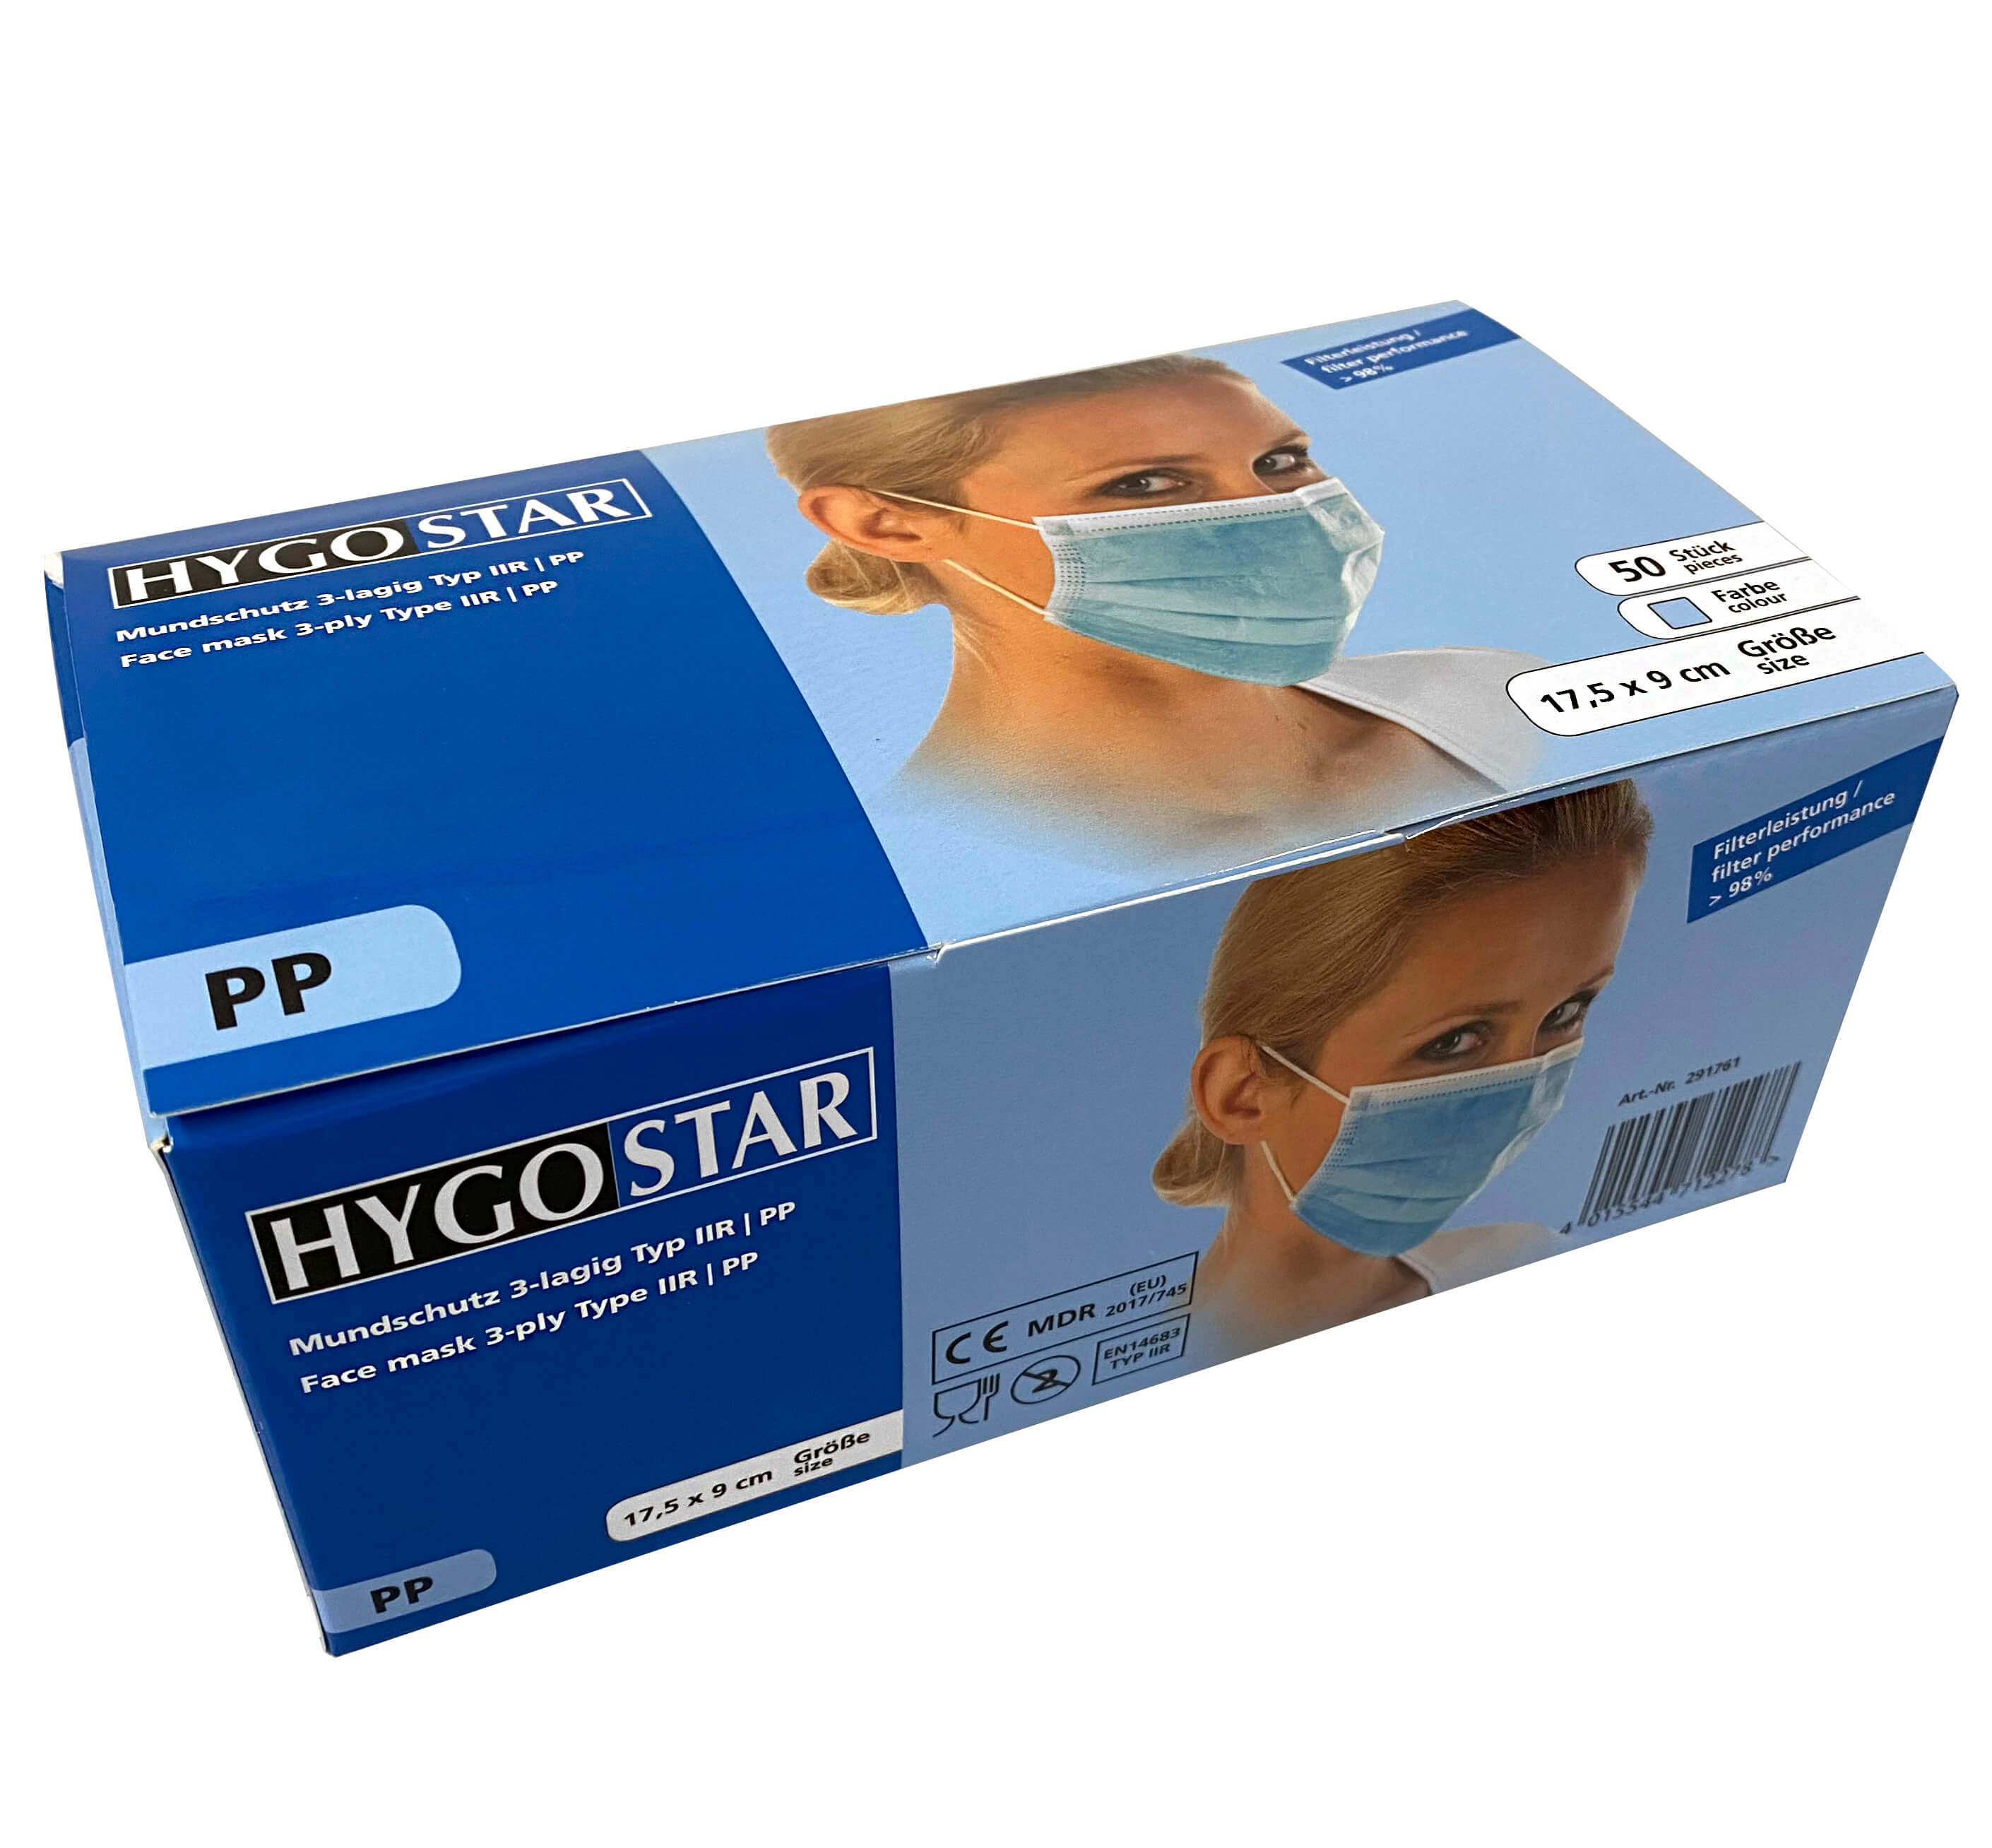 Face mask 3-ply, Type IIR (98%), PP - blue (50 pcs.)